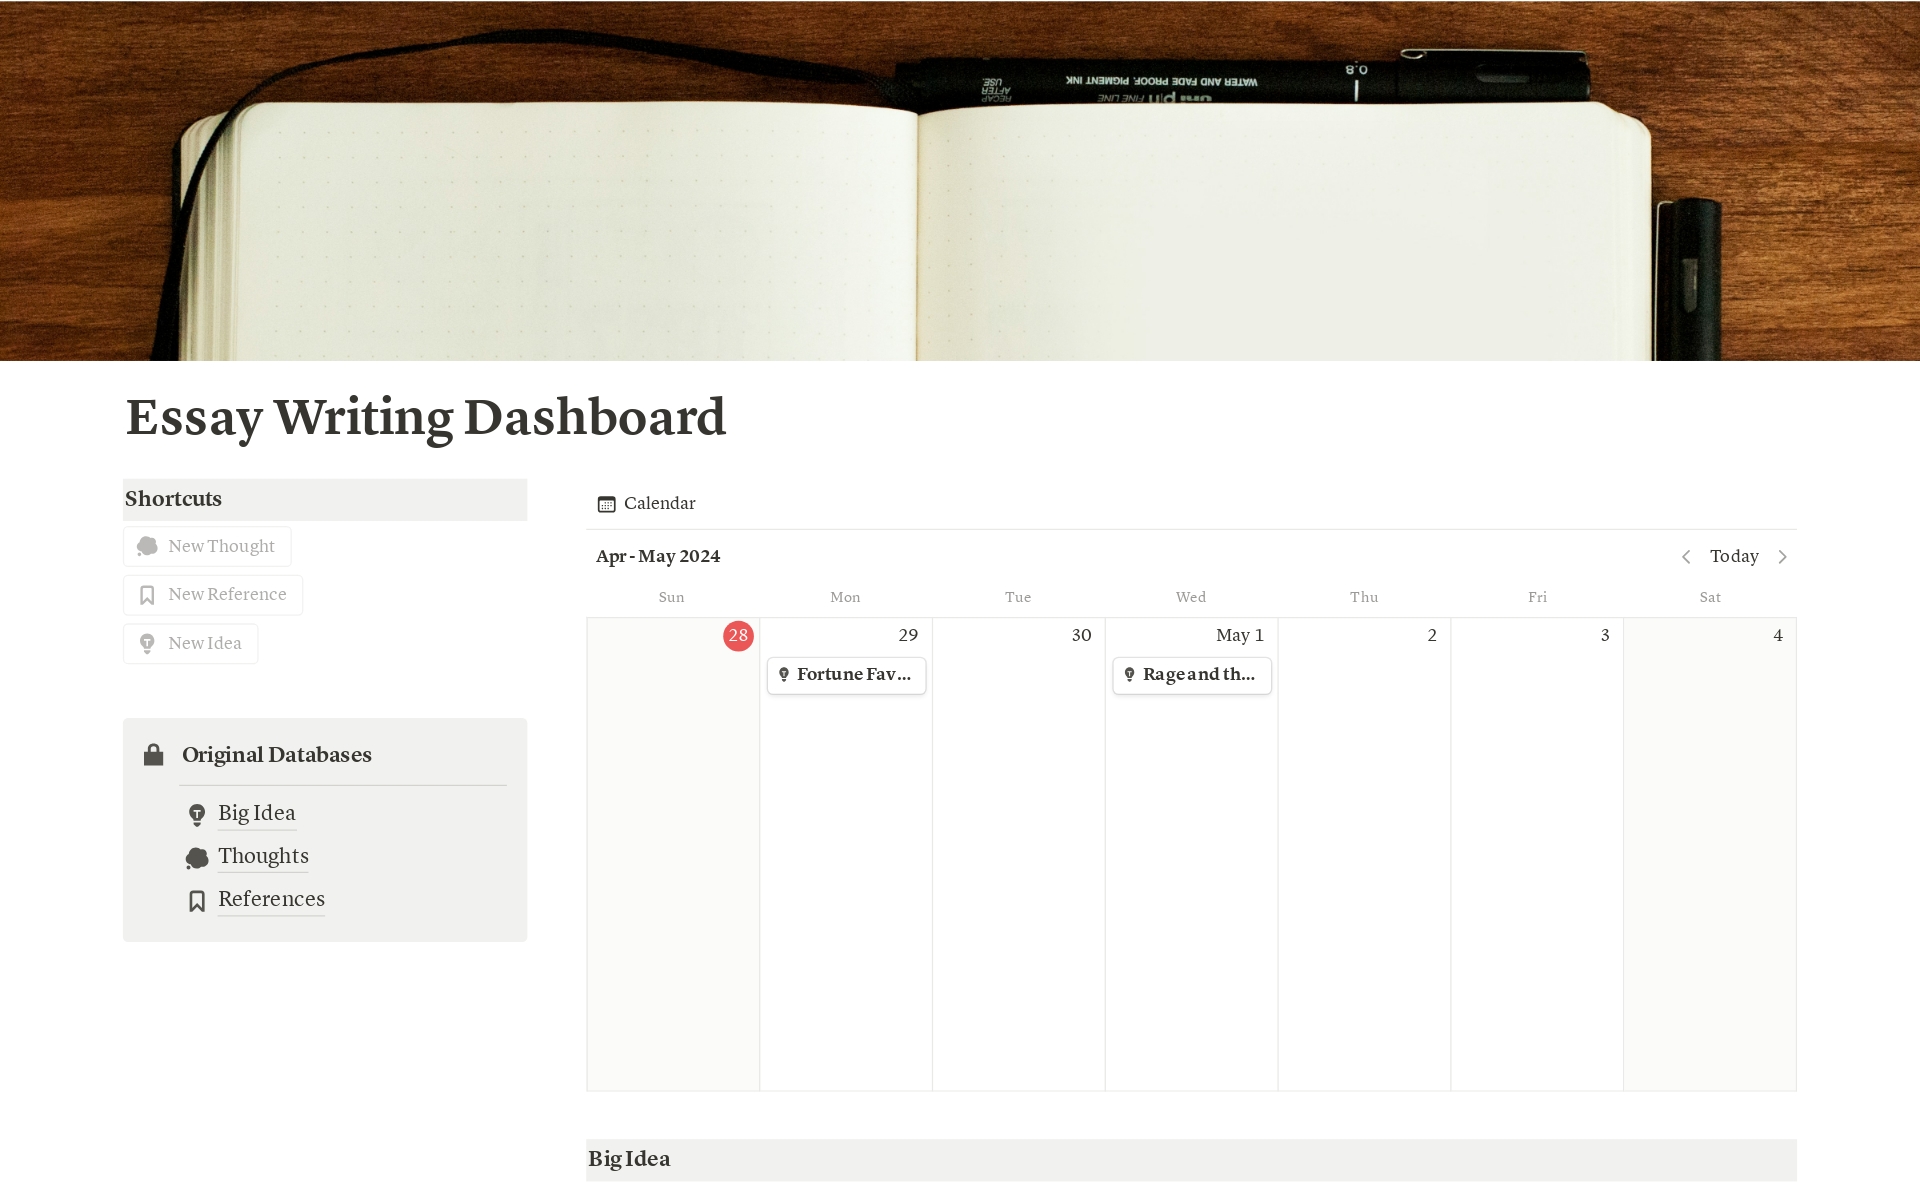 The Essay Writing Dashboard is a Notion template where you can assemble thoughts into a comprehensible essay whether it’s for personal use or academia.